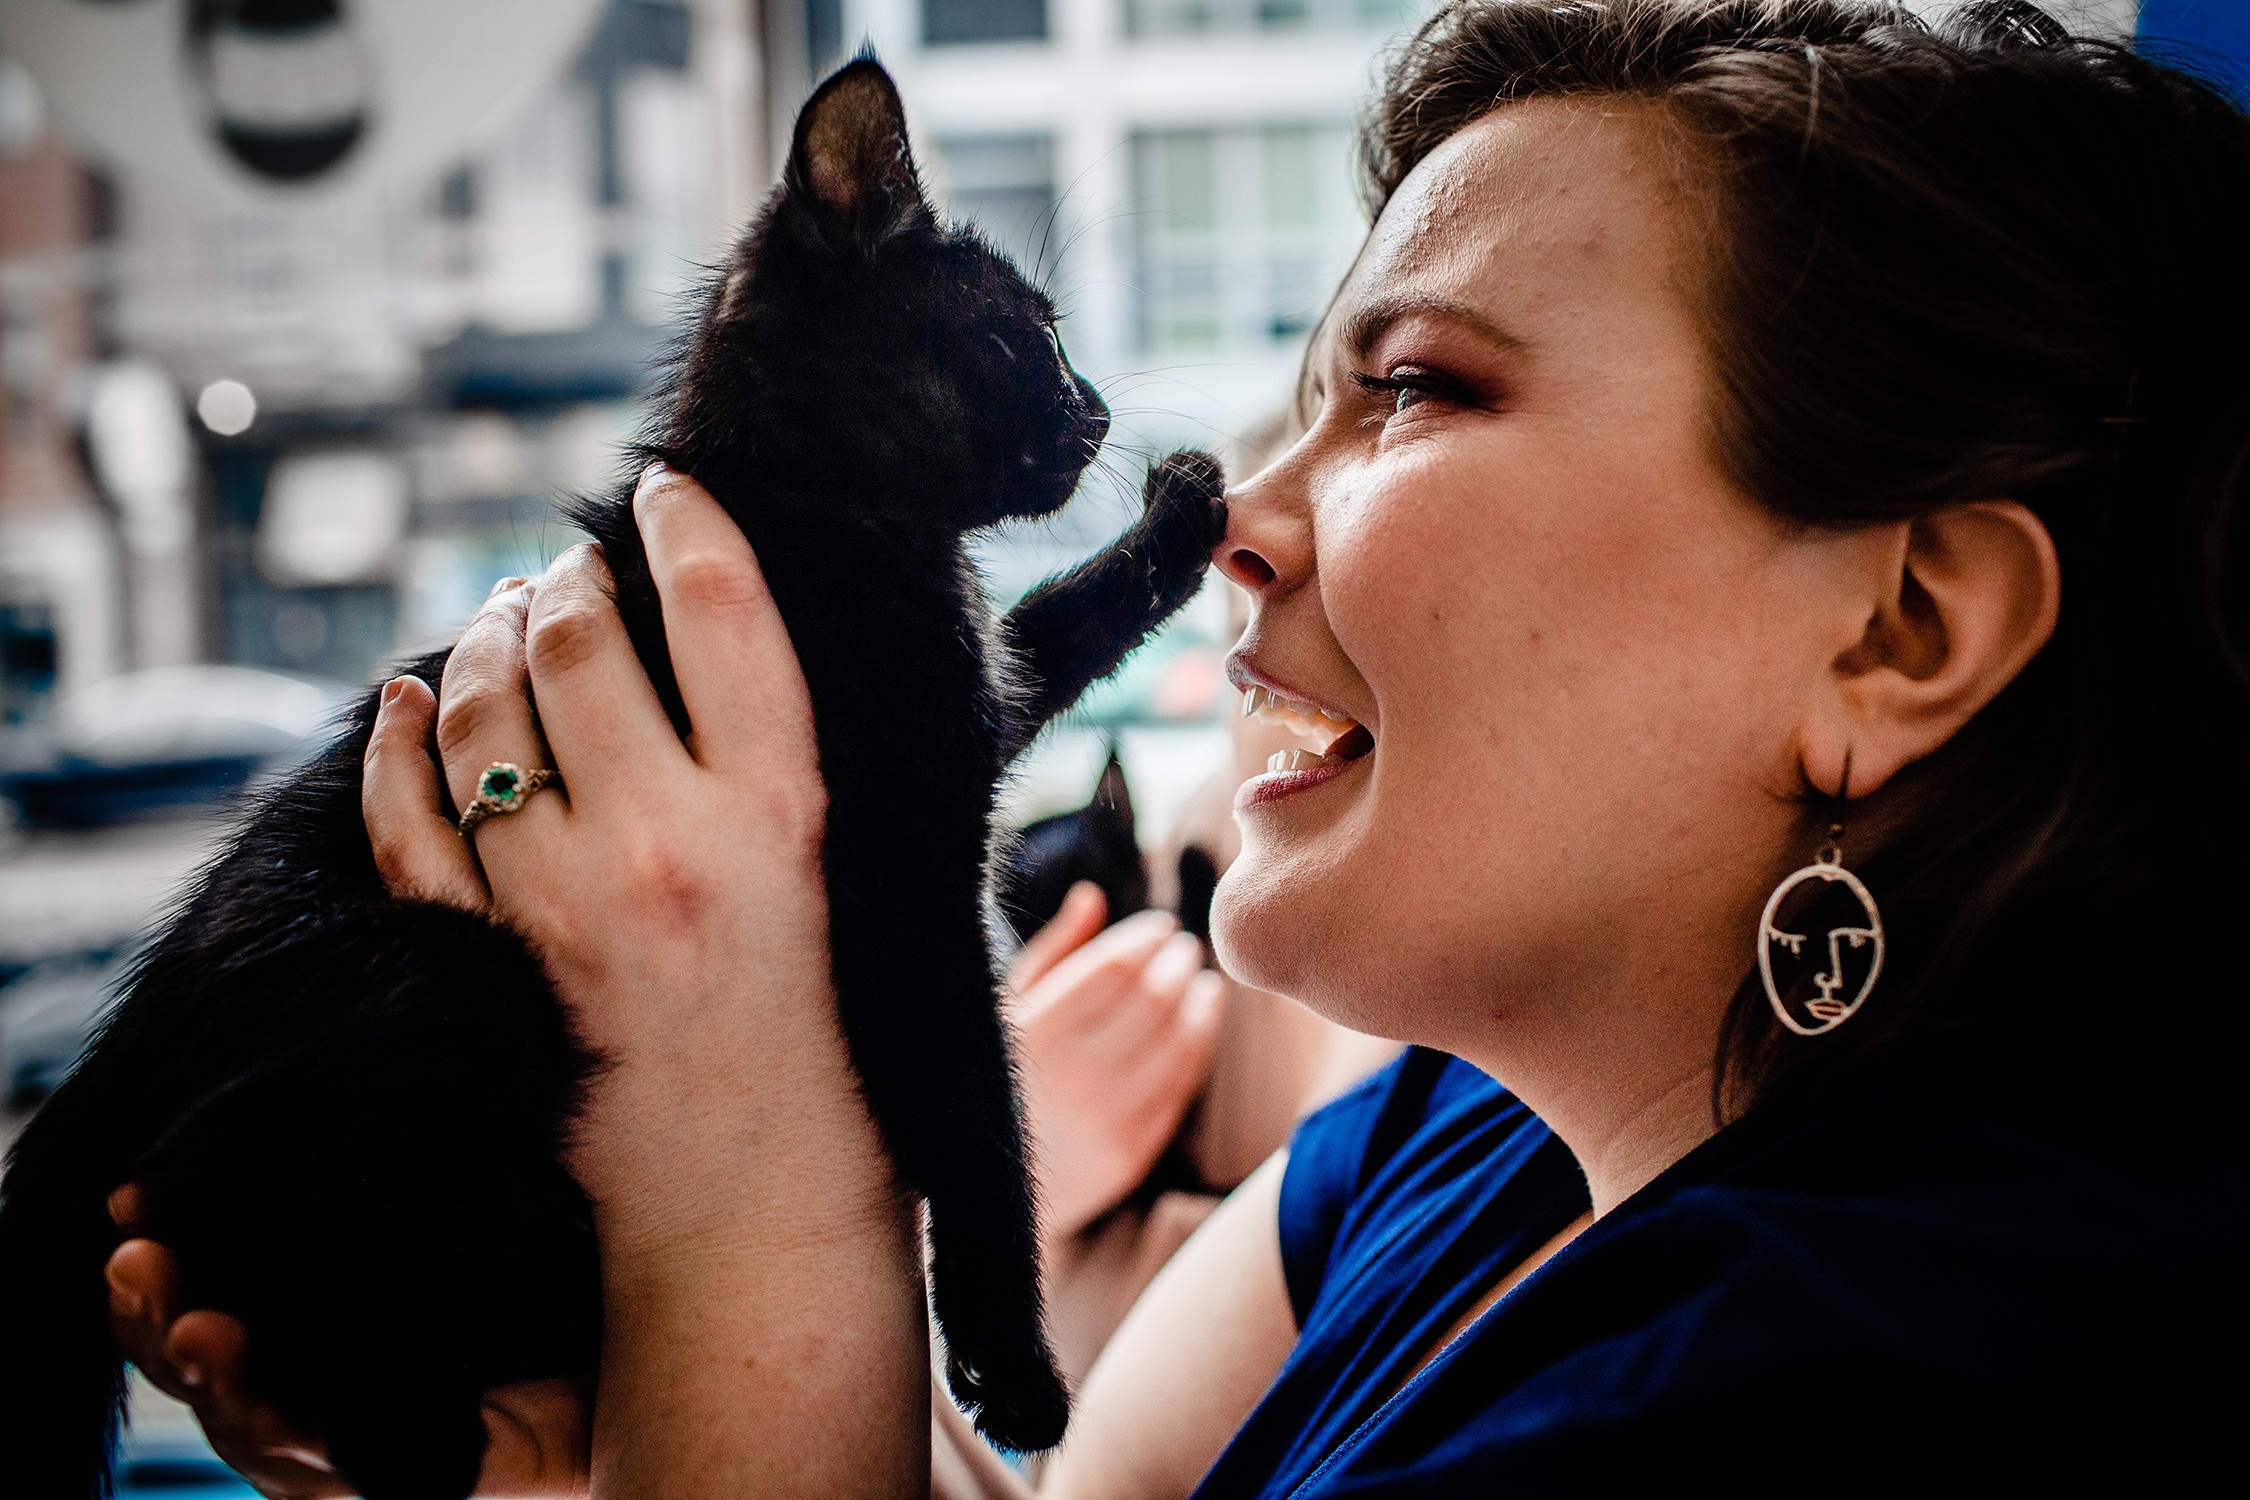 A couple plays with kittens during a cat cafe engagement session in Chicago.